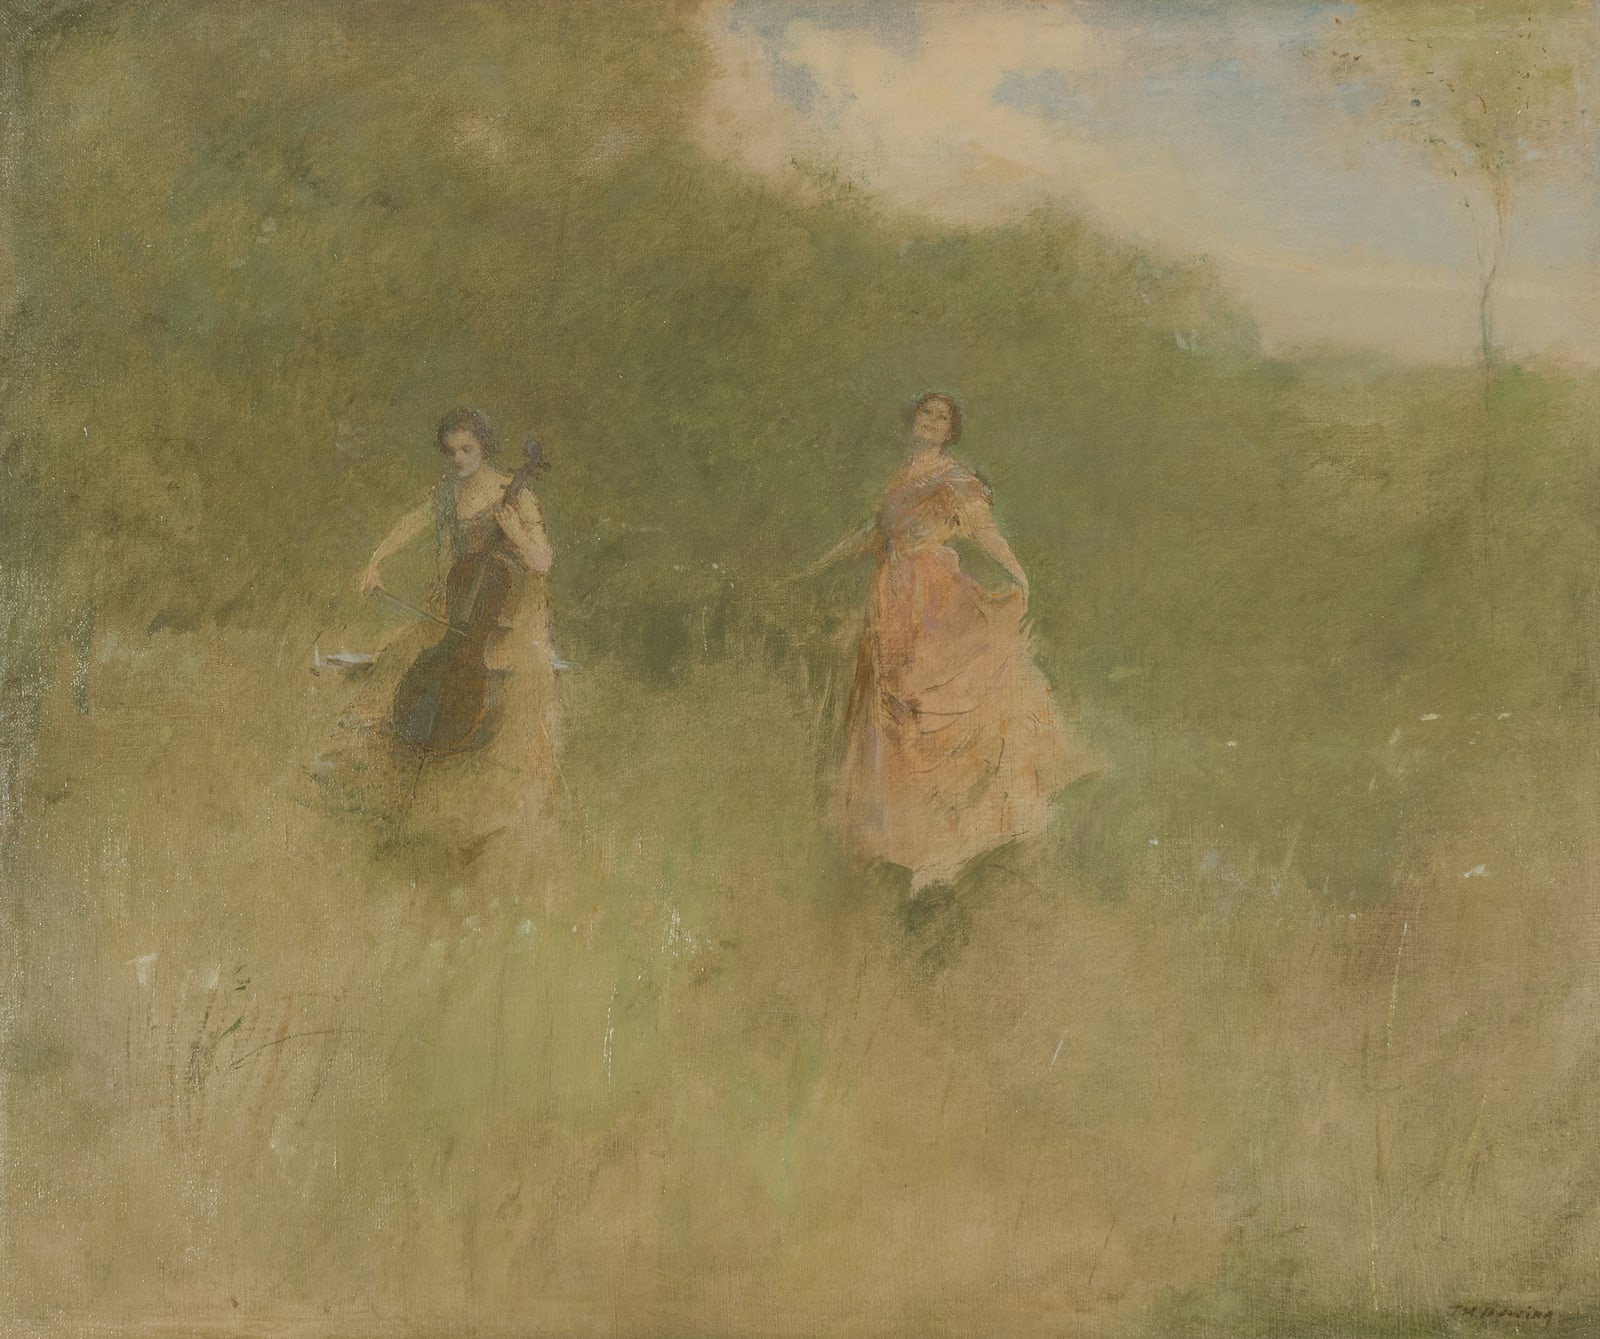 Thomas Wilmer Dewing, May (Welcome Sweet Springtime), c. 1890-1900